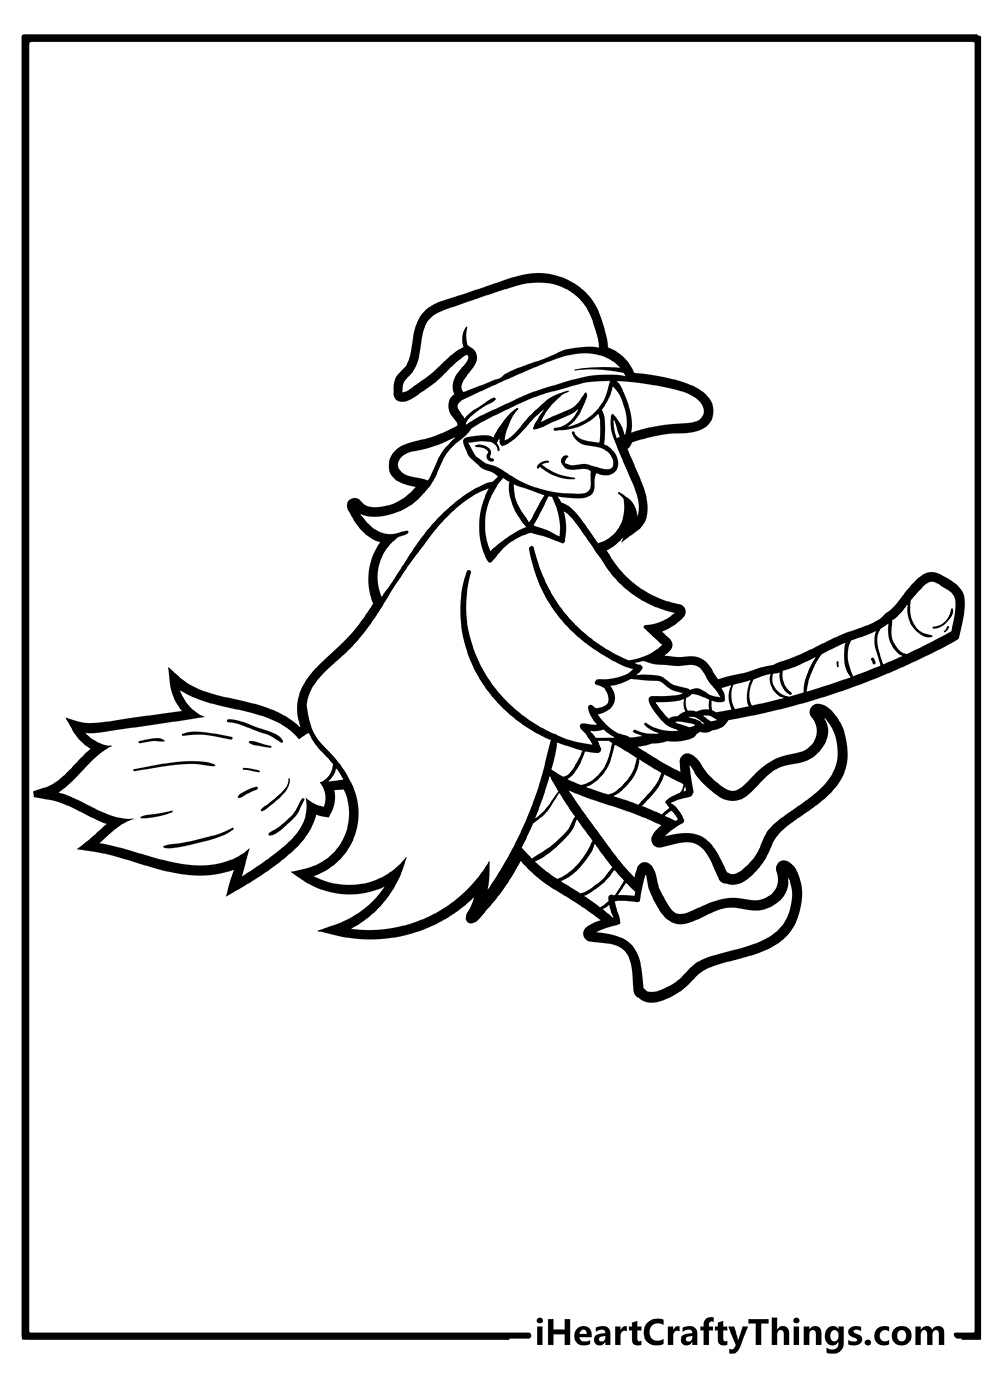 Witch Coloring Sheet for children free download